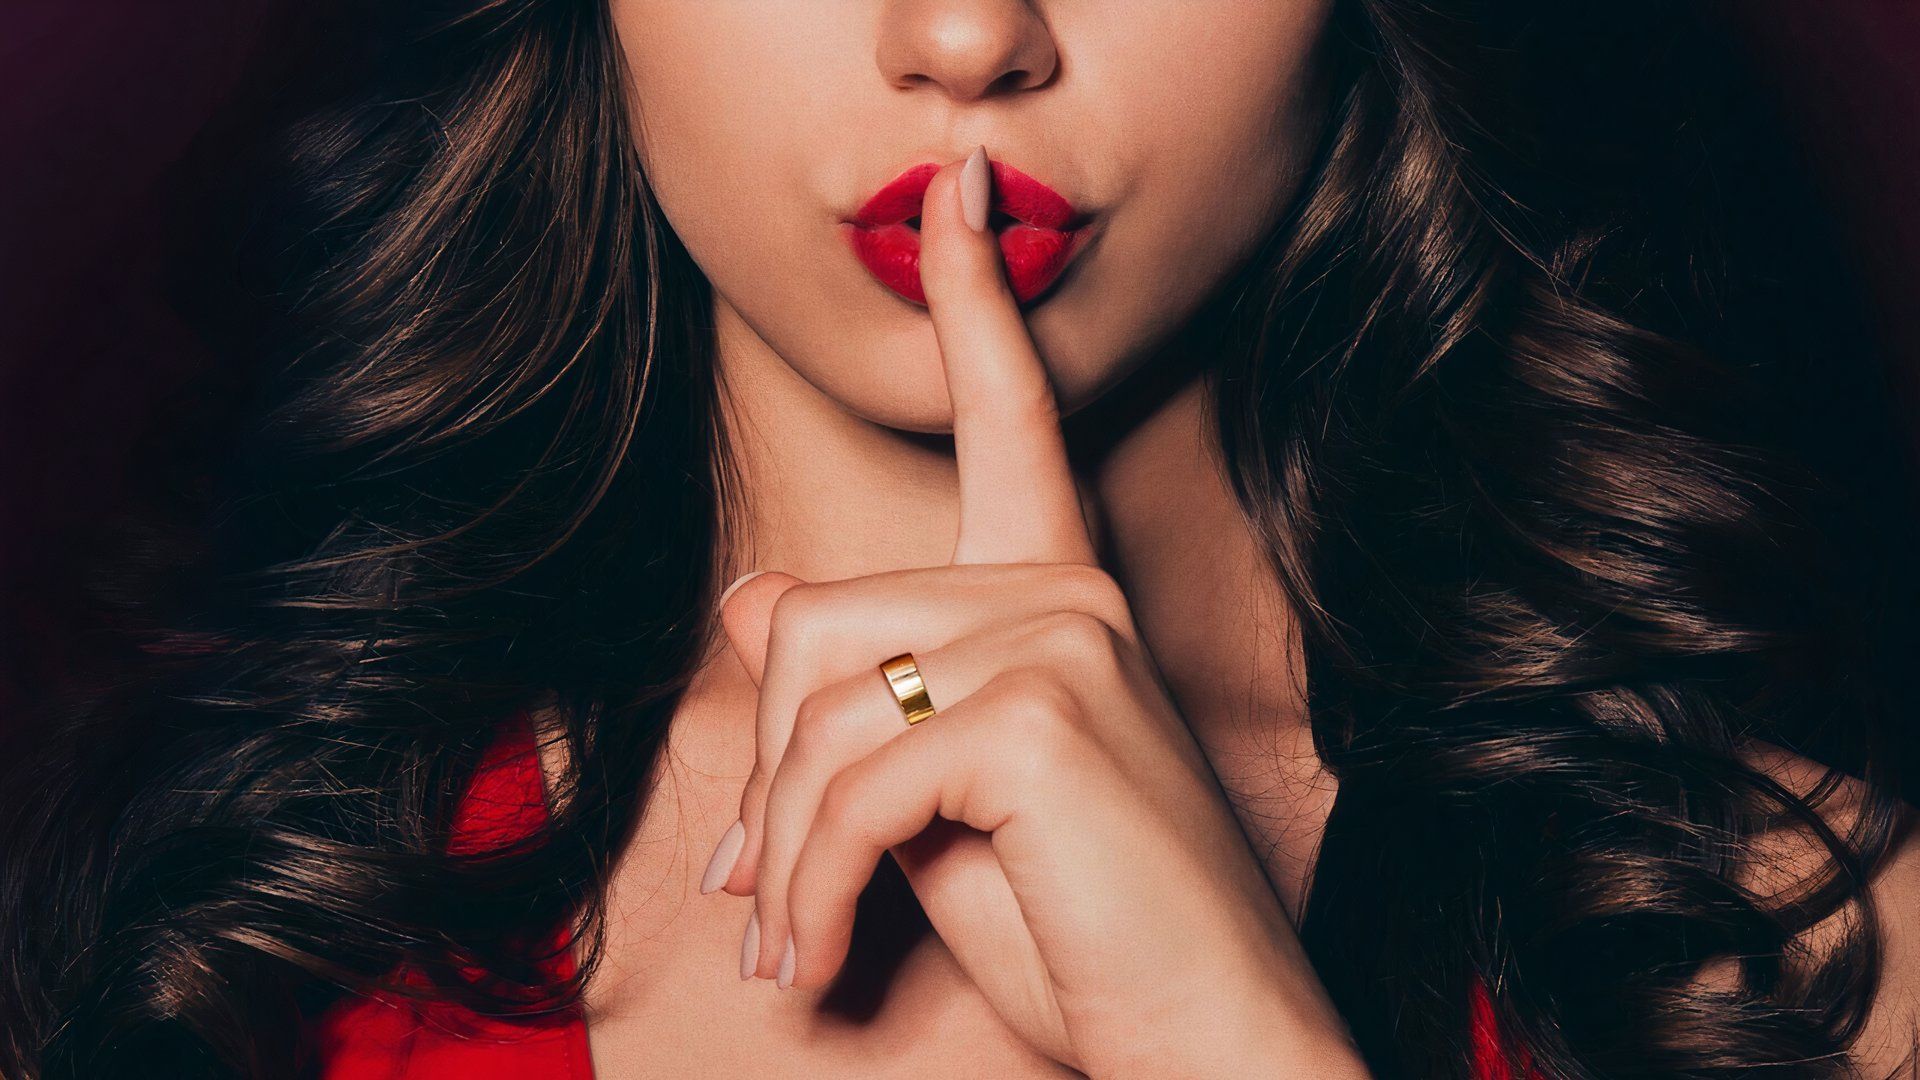 A woman with red lipstick, wearing a red dress in Ashley Madison Sex, Lies, & Scandal